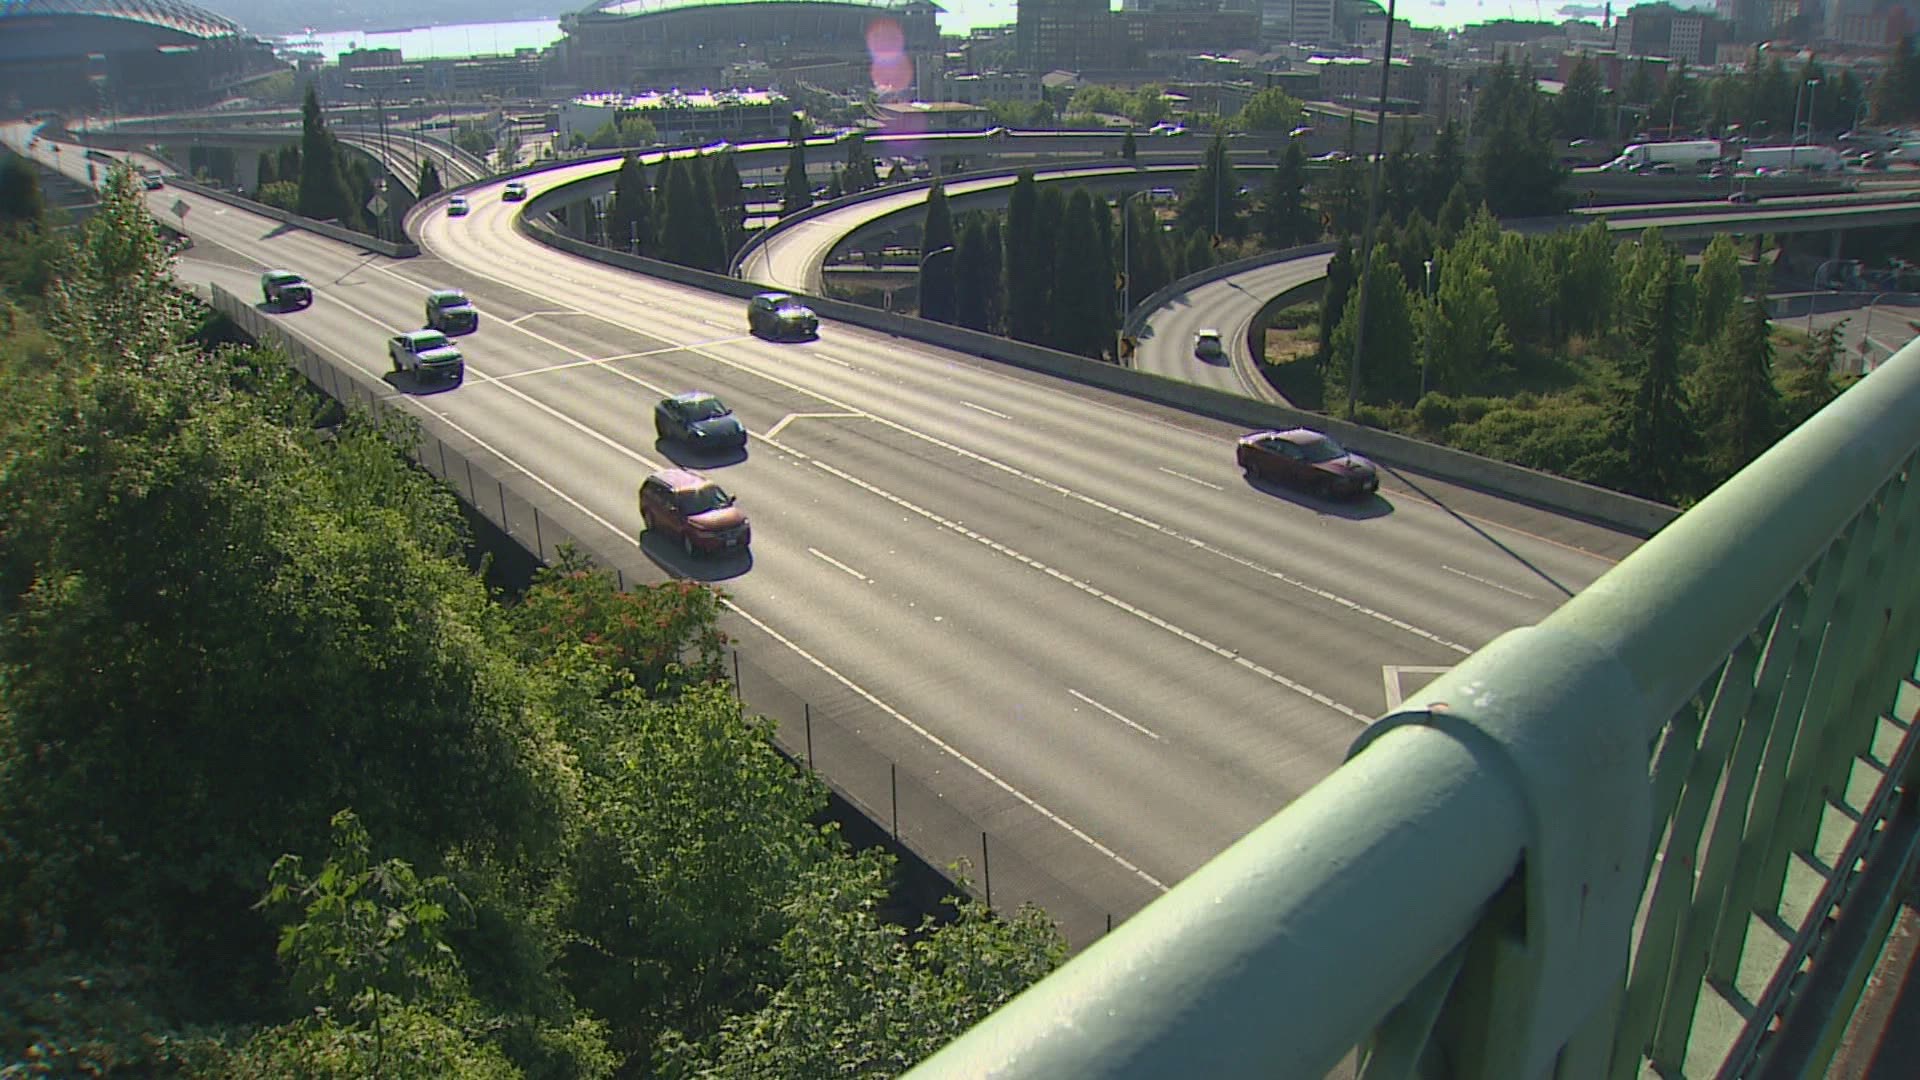 A scooter, shopping carts and propane tanks have all been tossed off overpasses along King County freeways creating dangerous conditions for drivers.